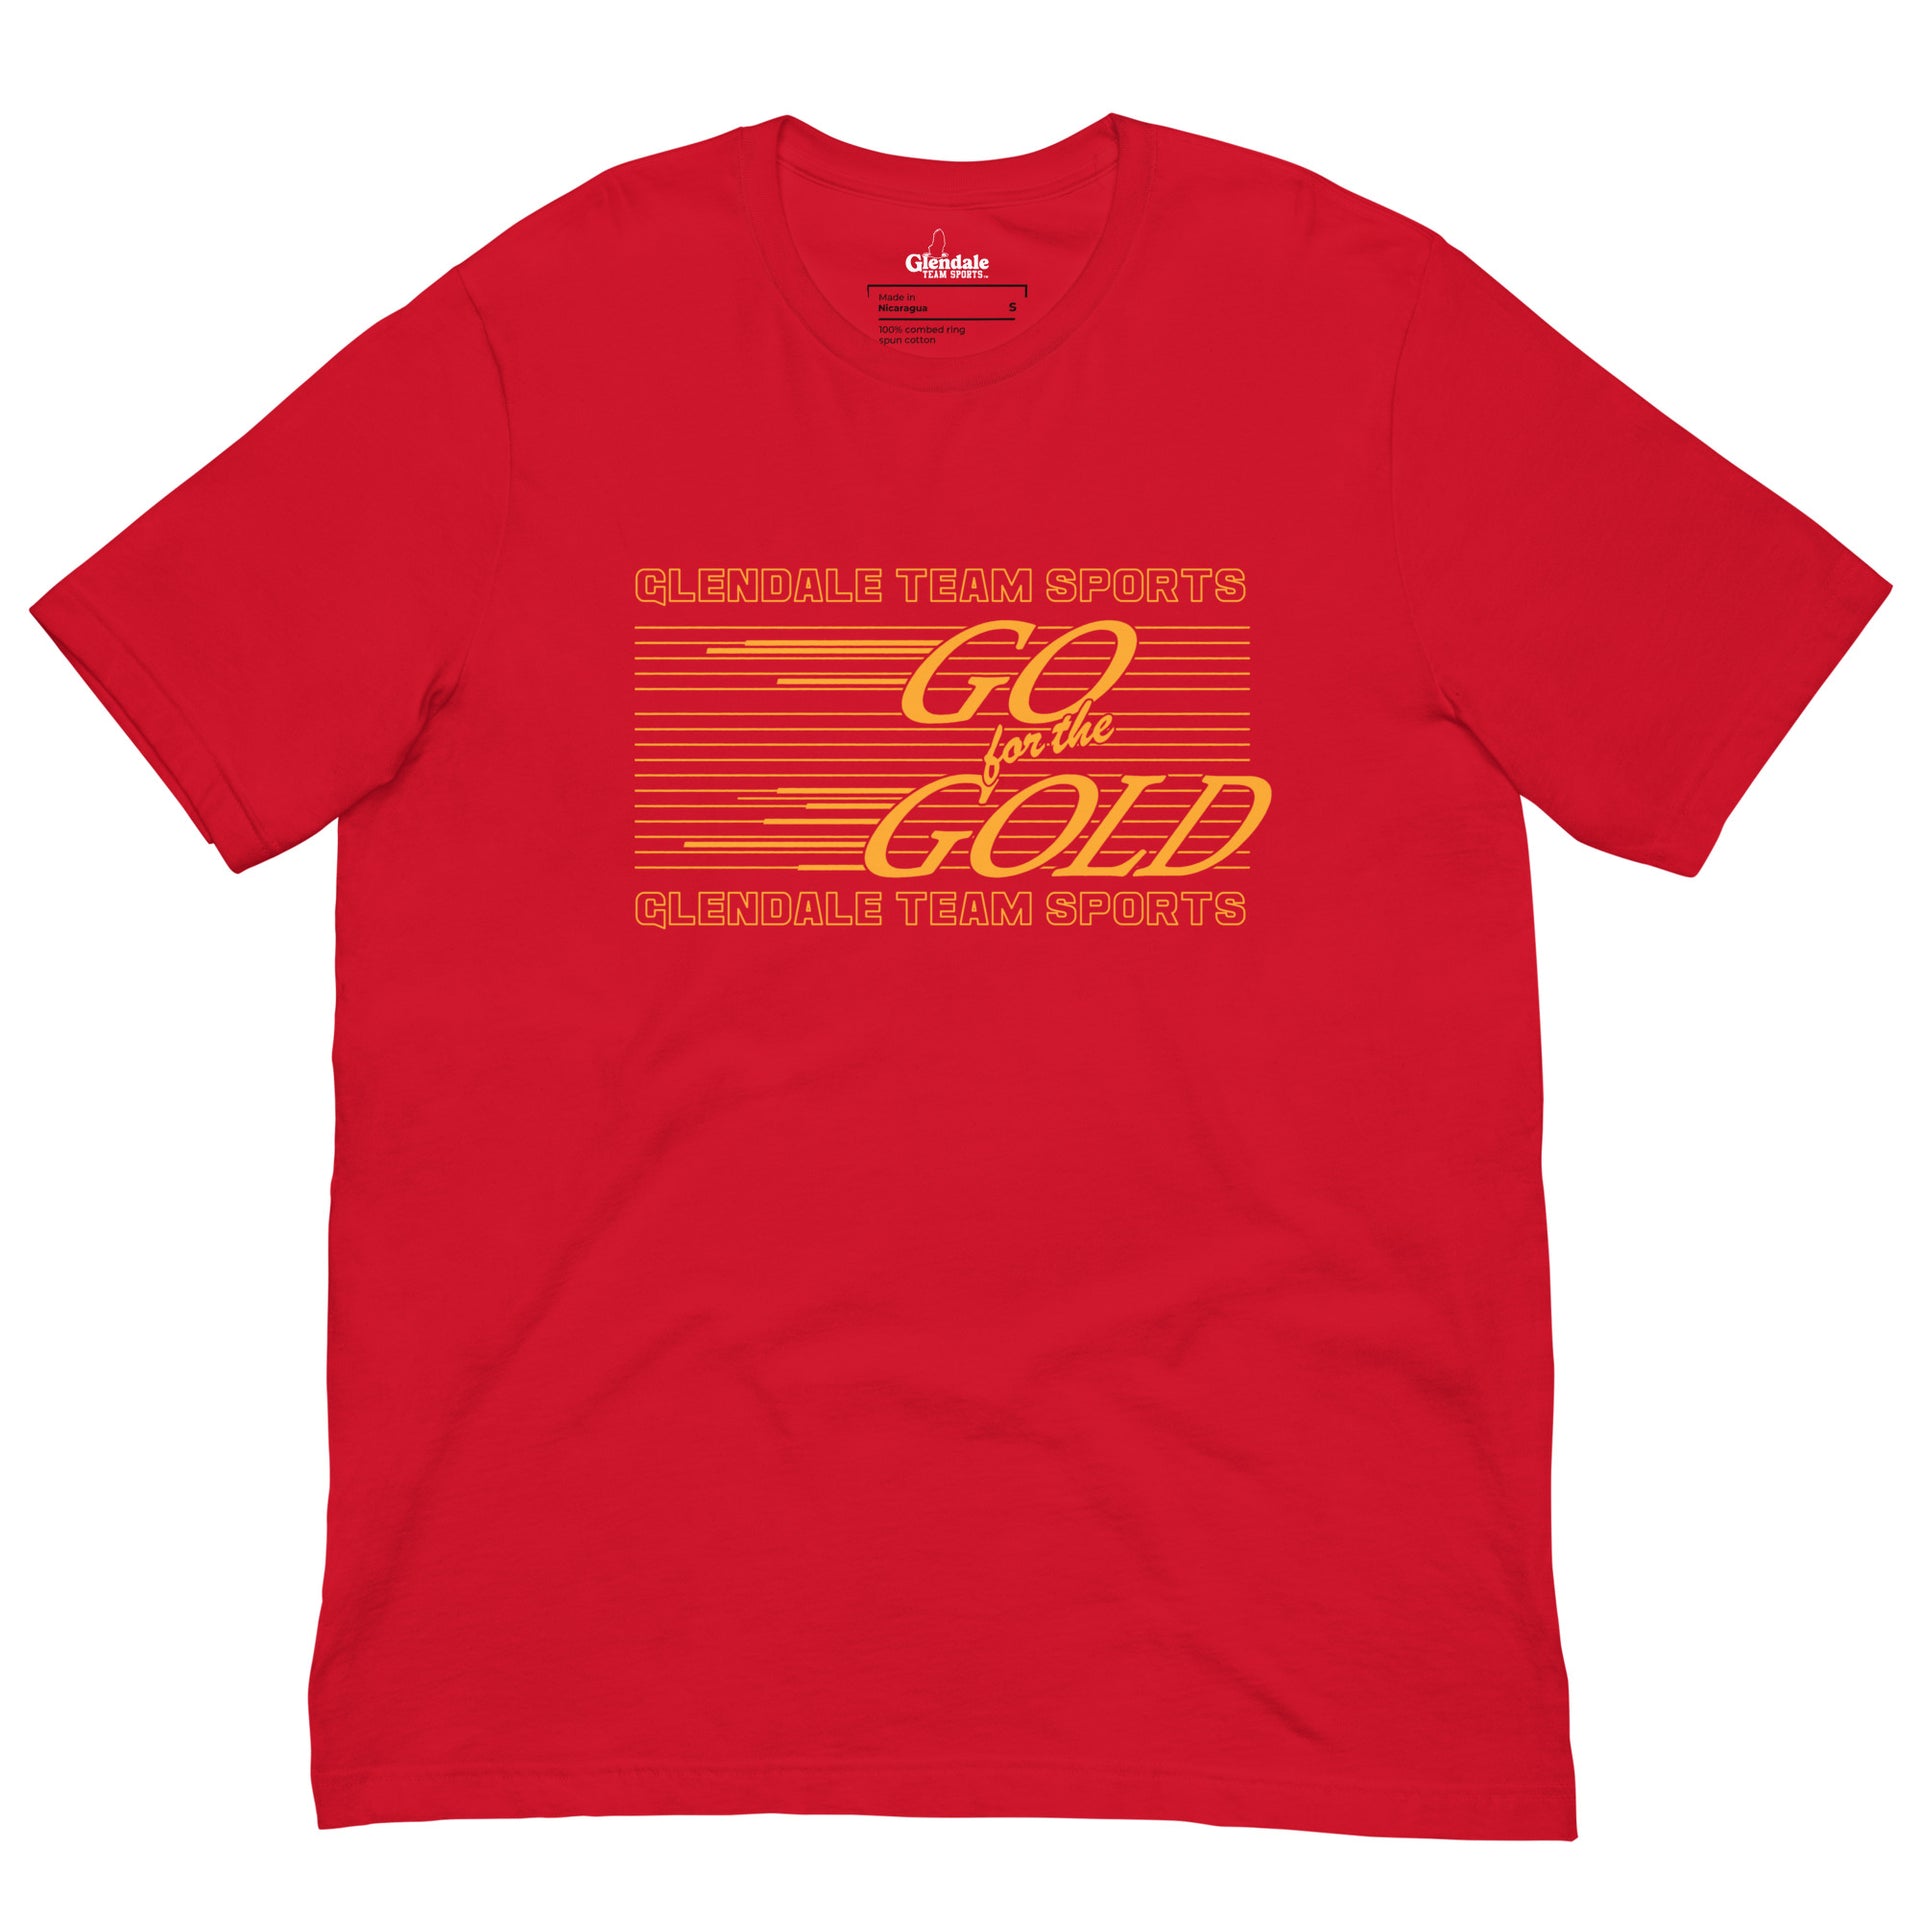 Go for the GOLD! The Trulympics - TruFit Athletic Clubs